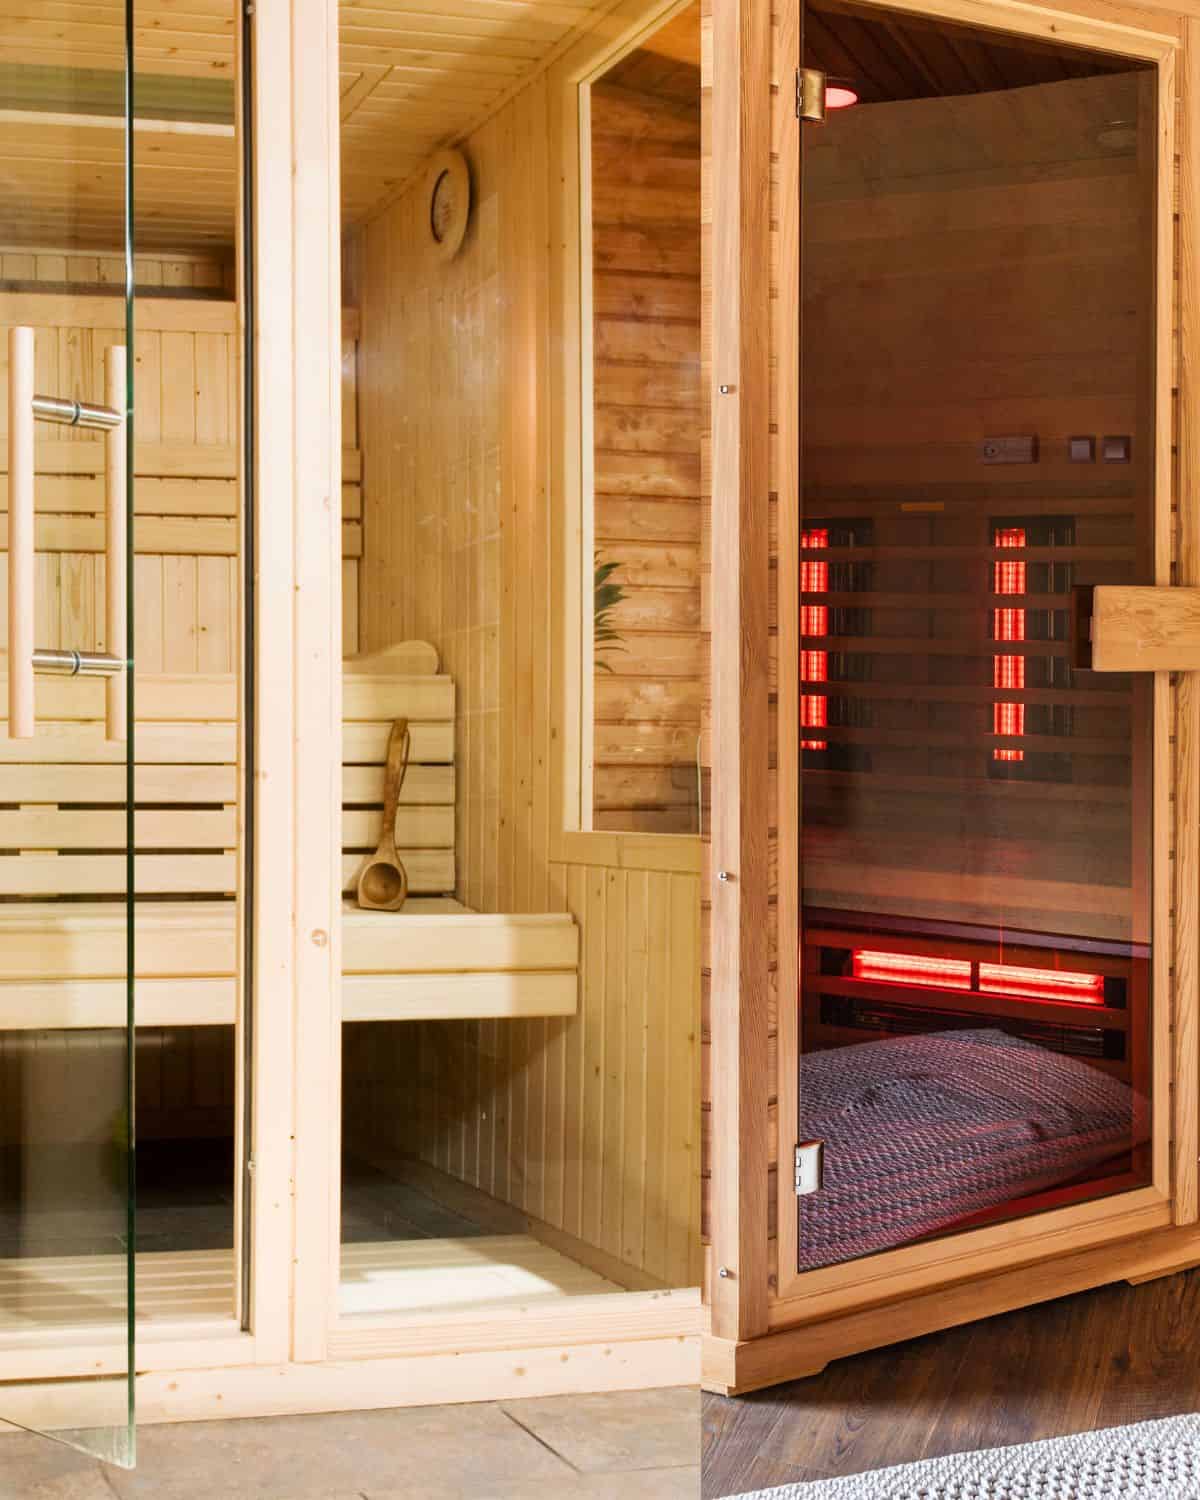 There is a tradional sauna space on the left side and an infrared sauna space on the right side to show the differences in heat and space needed for each sauna type.